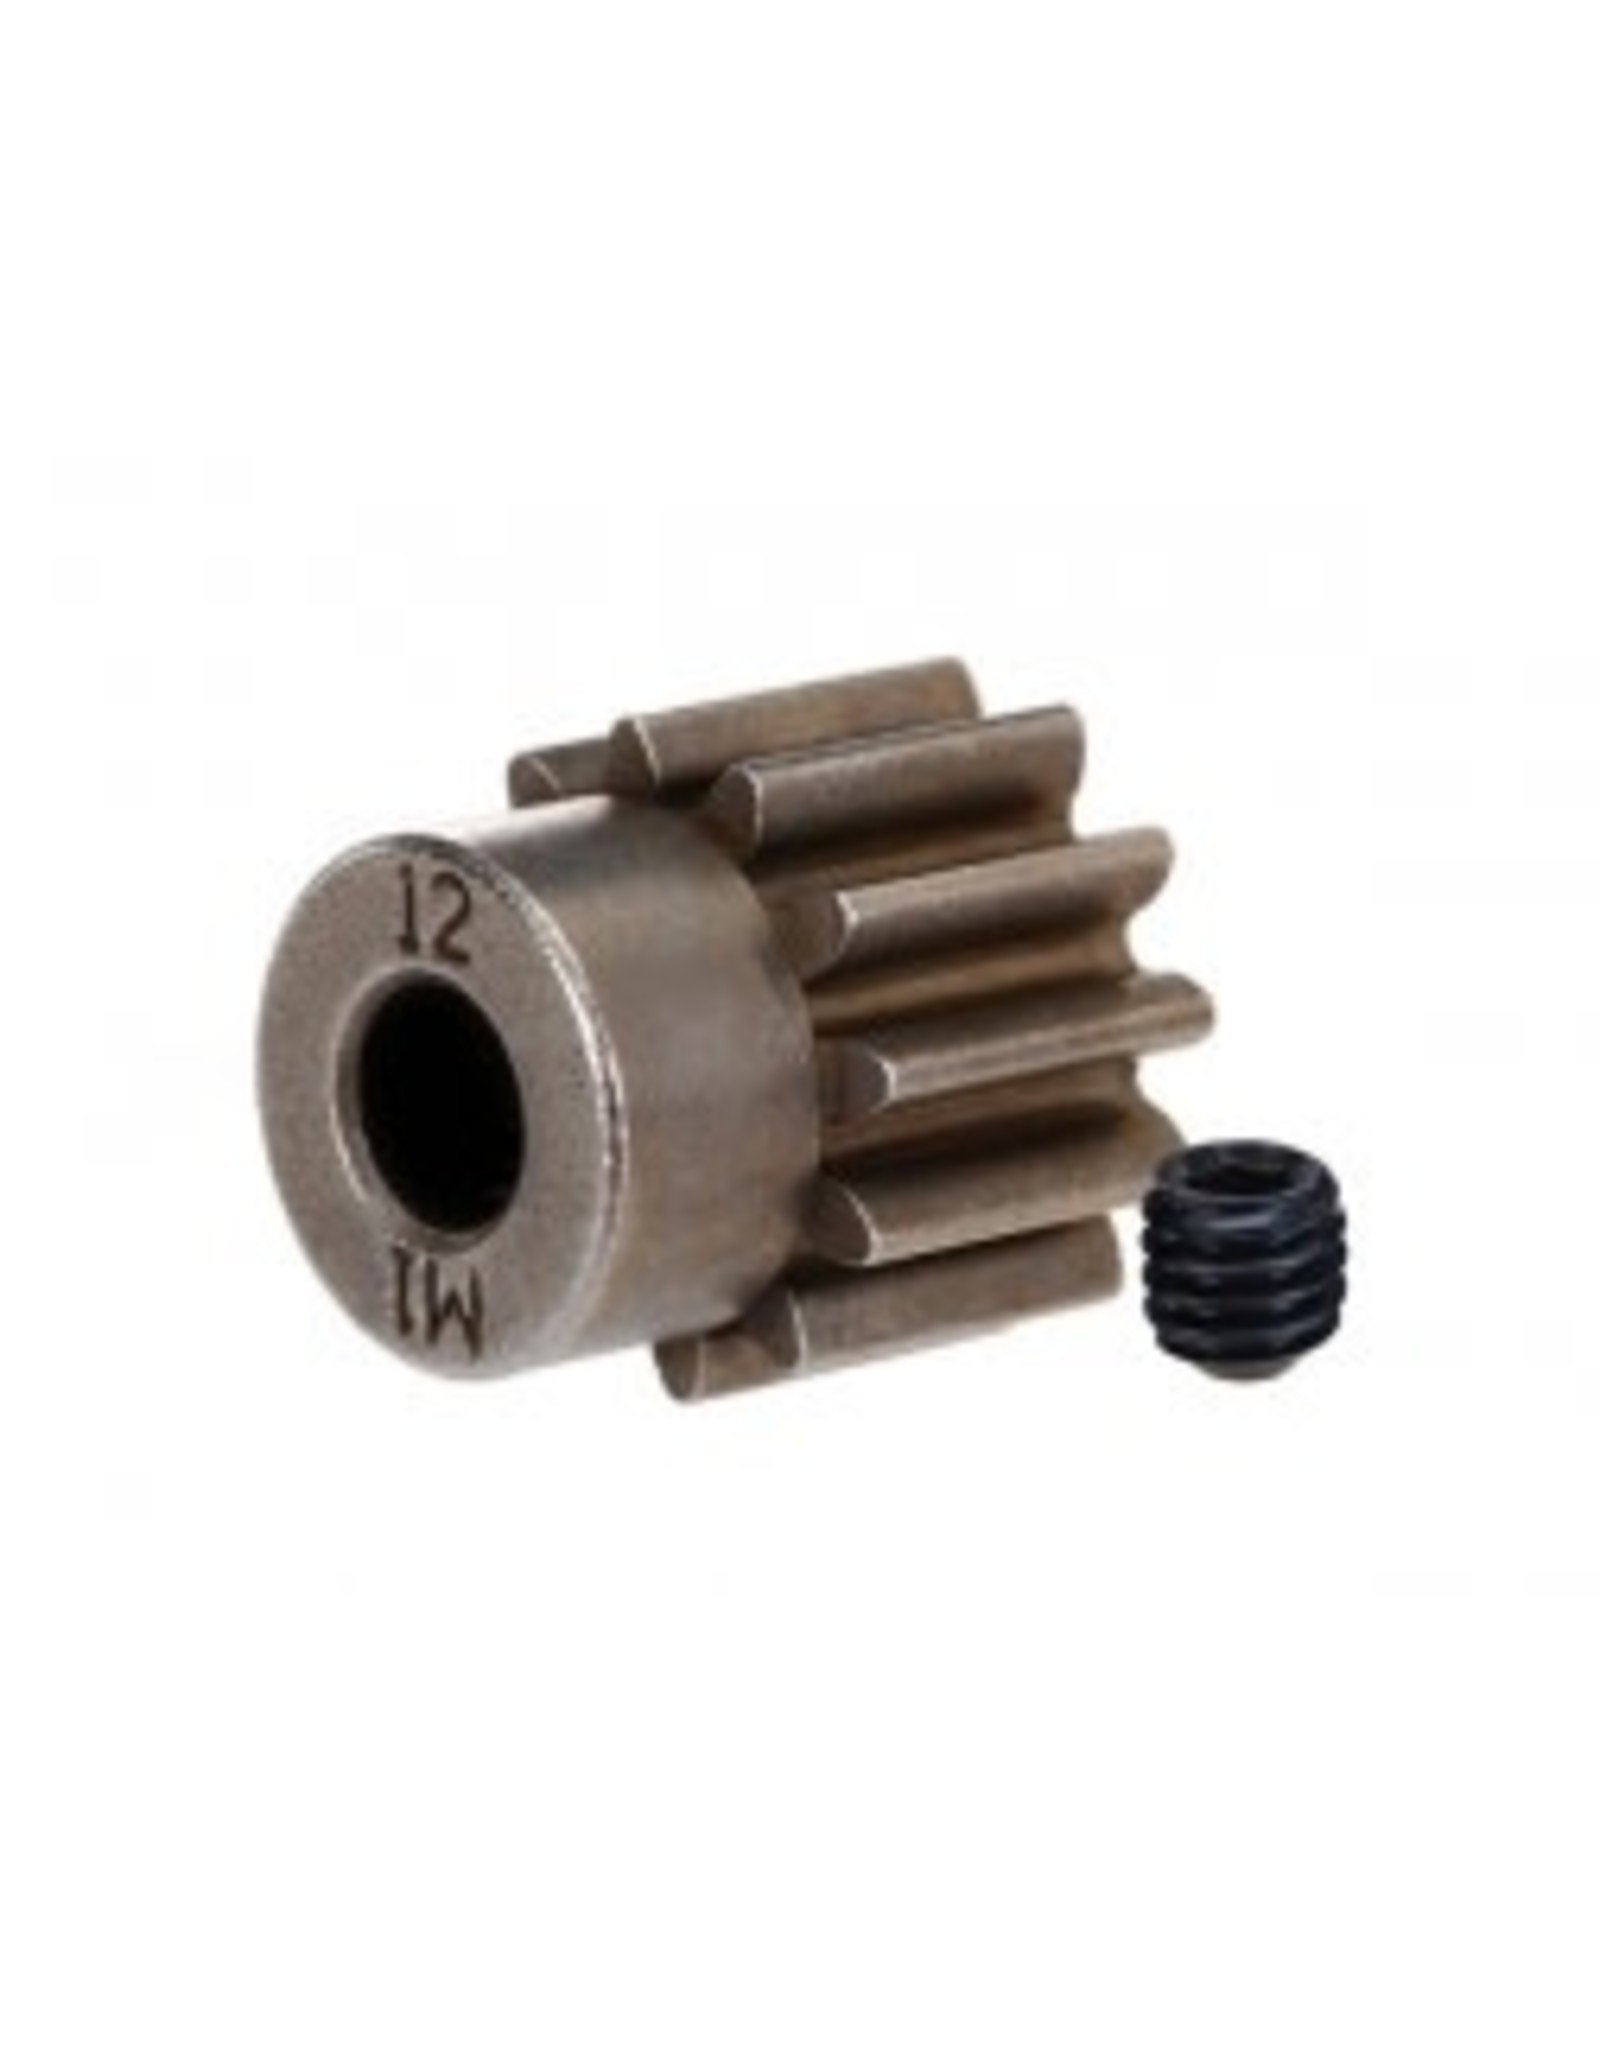 Traxxas Gear, 12-T pinion (1.0 metric pitch) (fits 5mm shaft)/ set screw (for use only with steel spur gears)